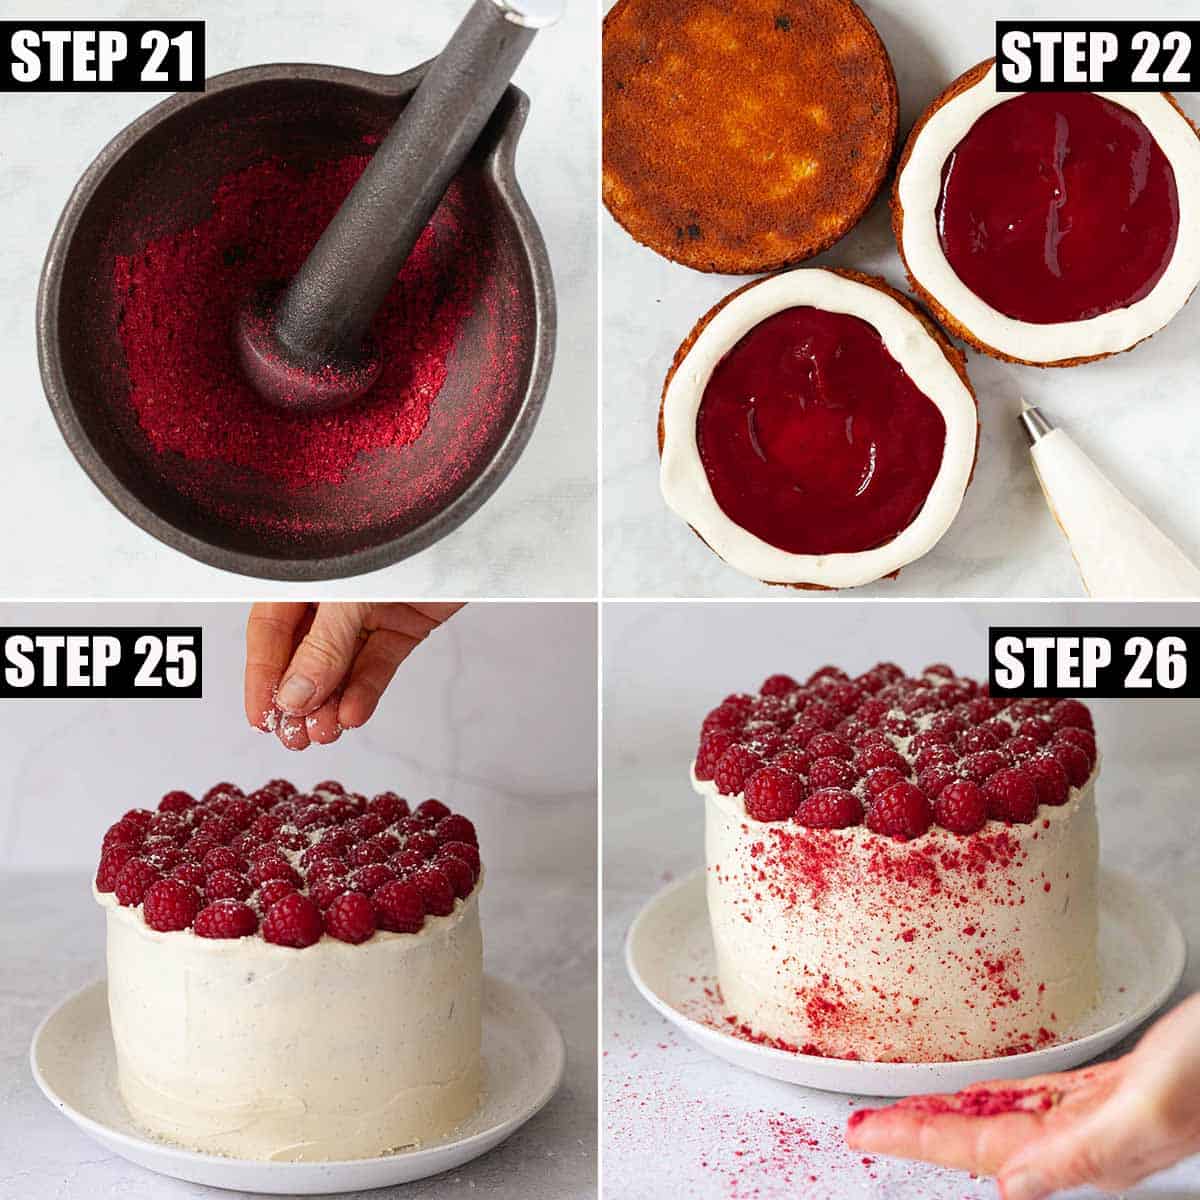 Collage of images showing a white chocolate and raspberry cake being assembled and decorated.